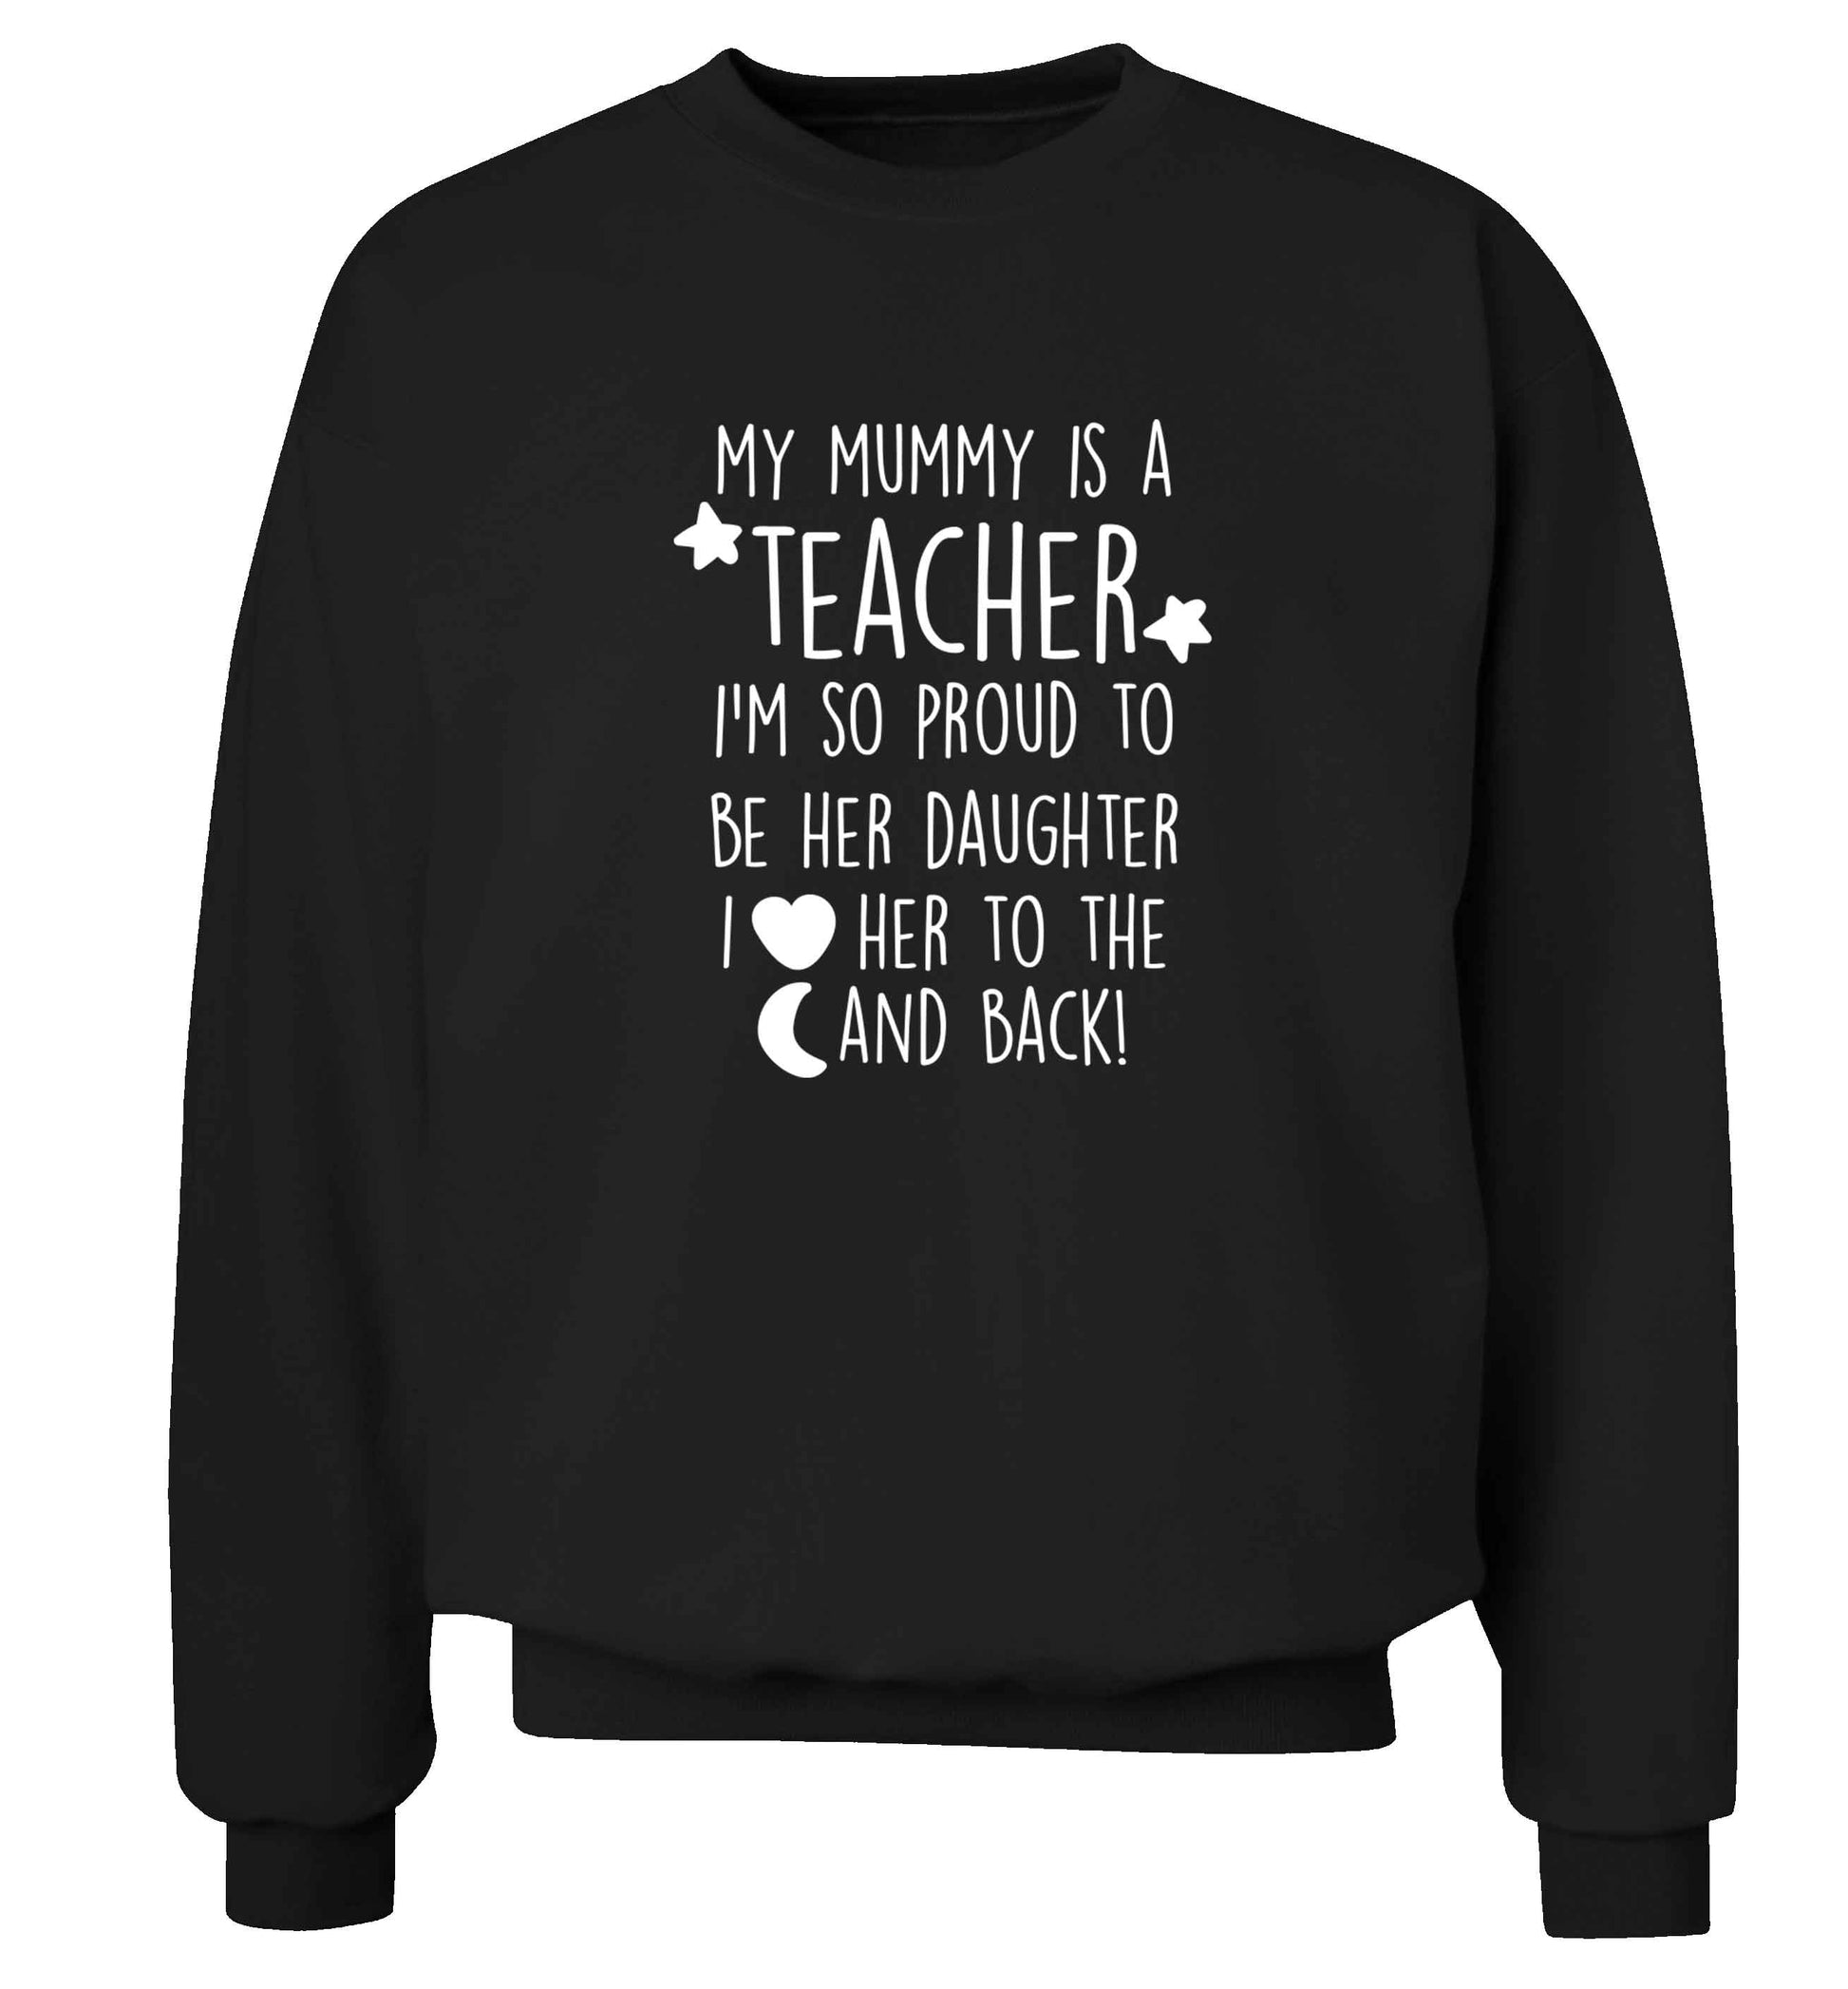 My mummy is a teacher I'm so proud to be her daughter I love her to the moon and back adult's unisex black sweater 2XL